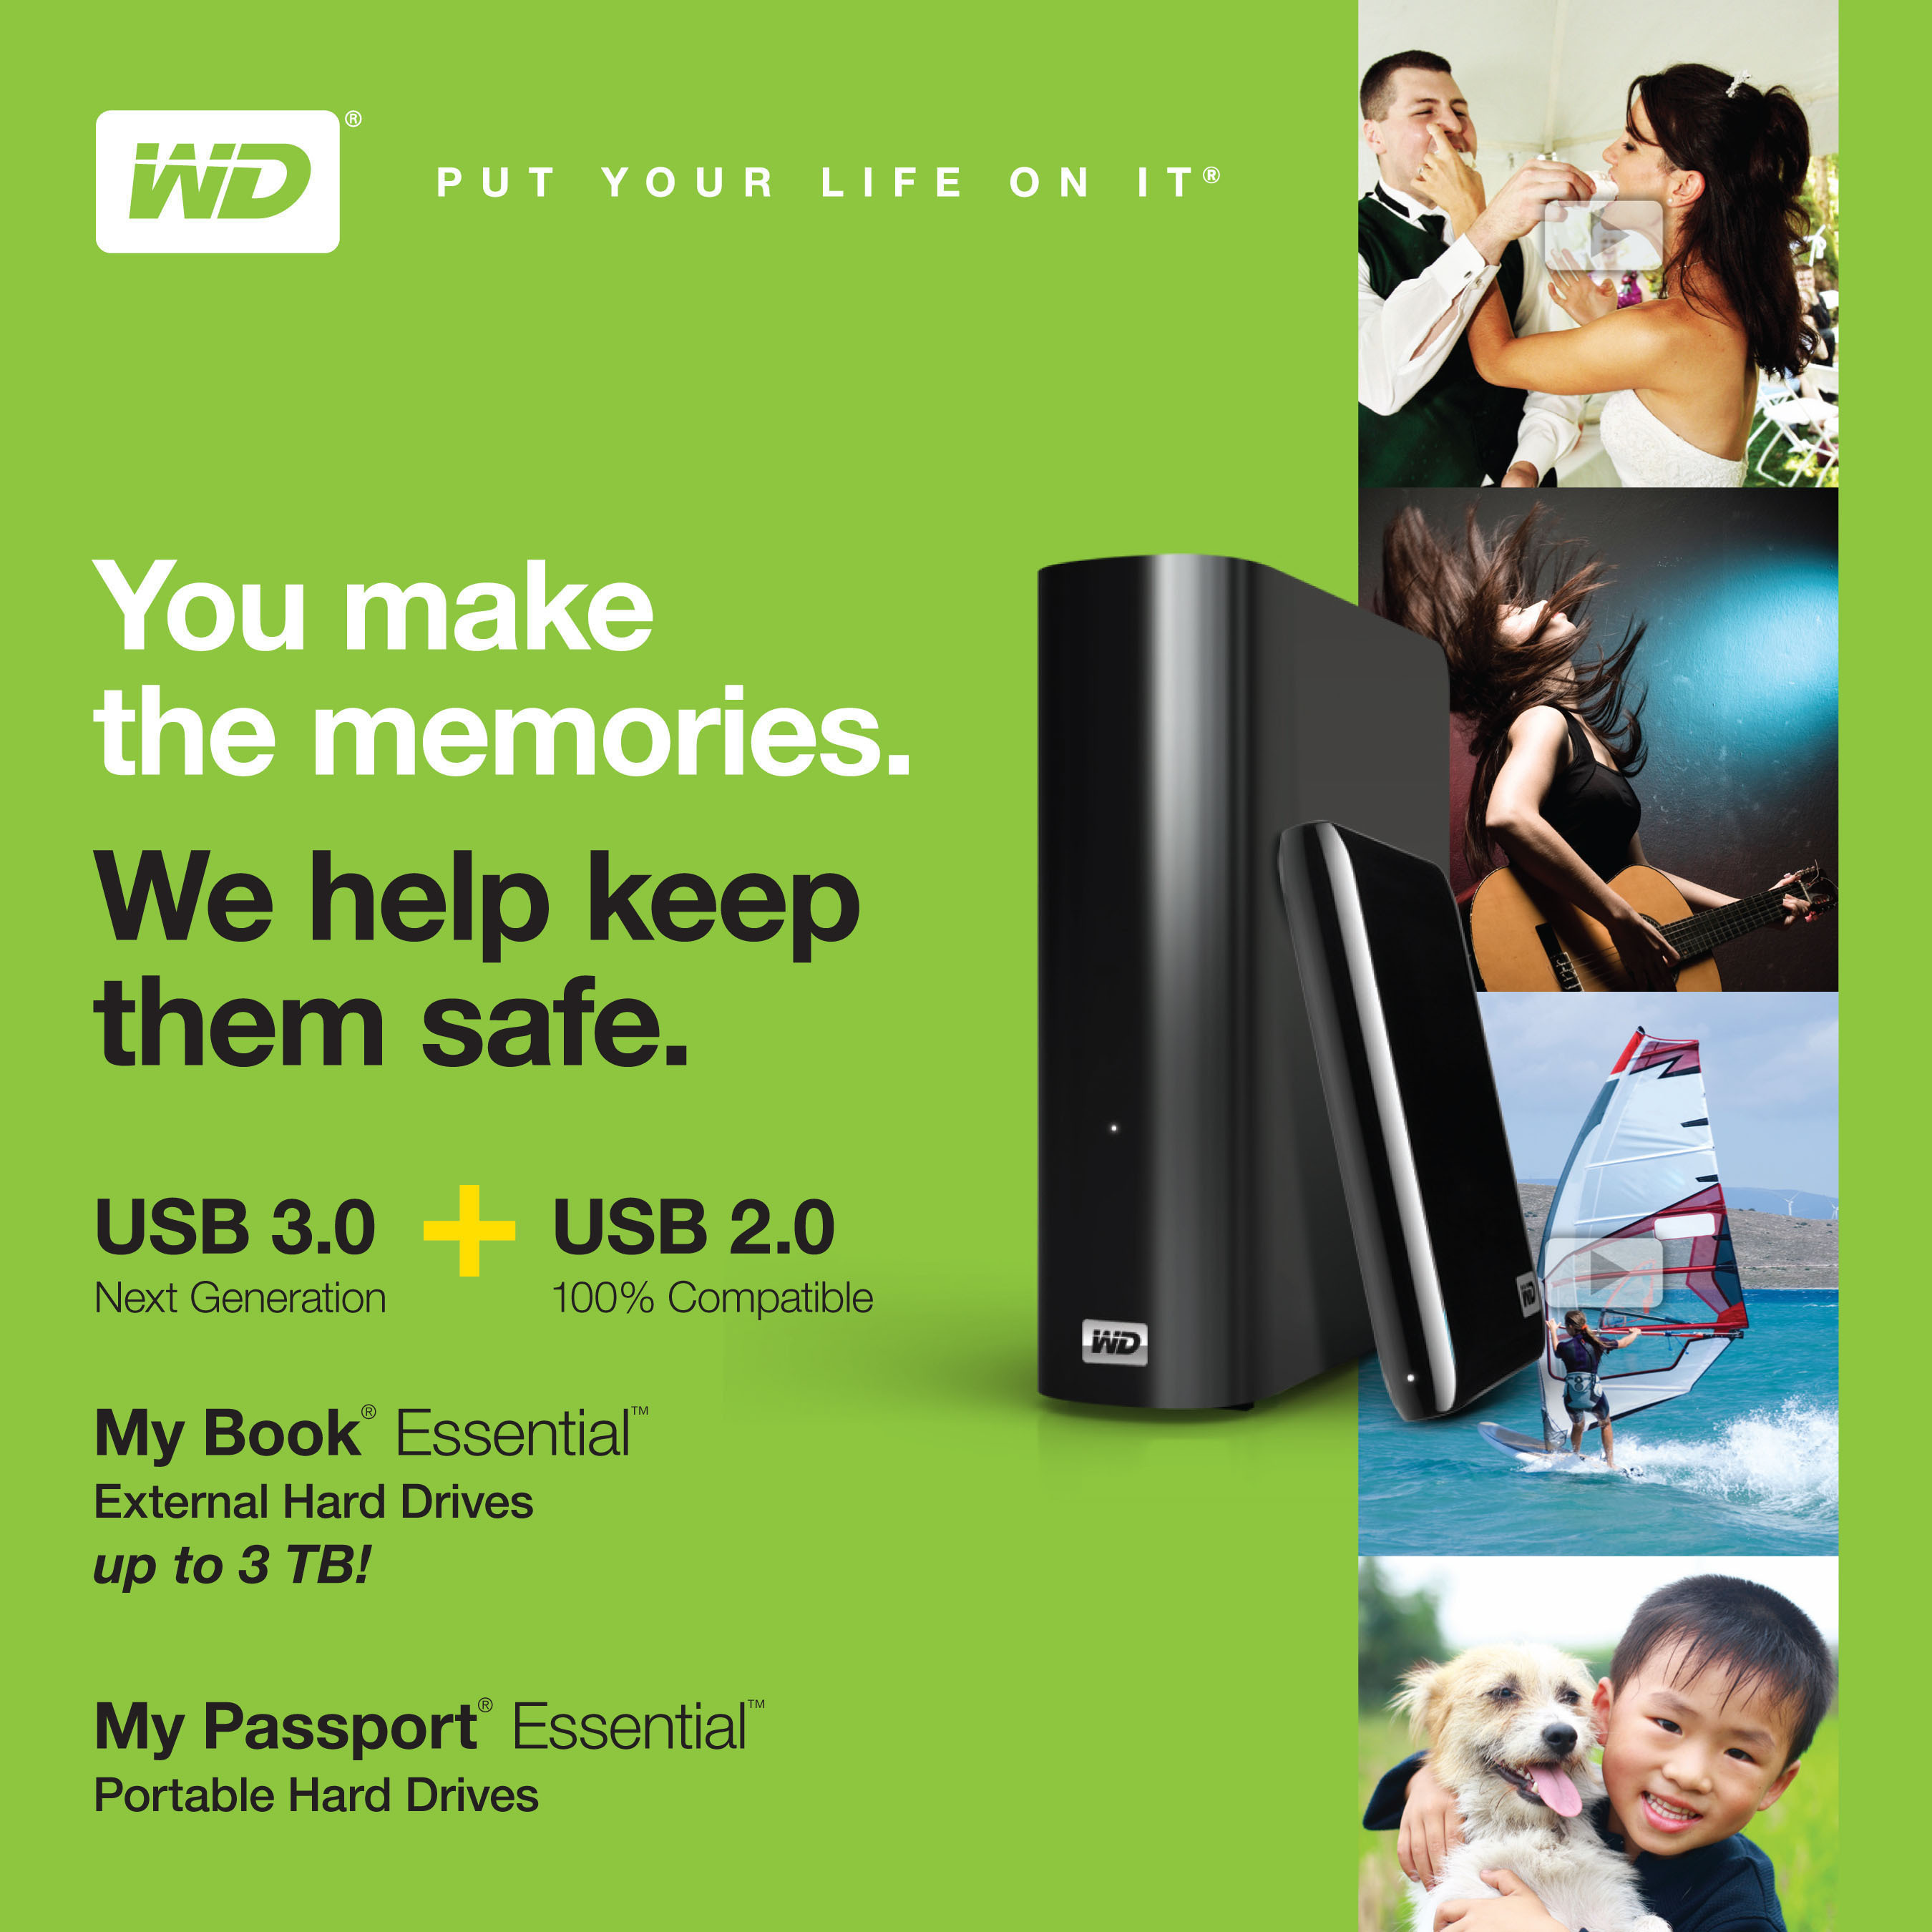 WD® Delivers USB 3.0 and 3 Terabytes With Its New External Hard Drive  Product Lines